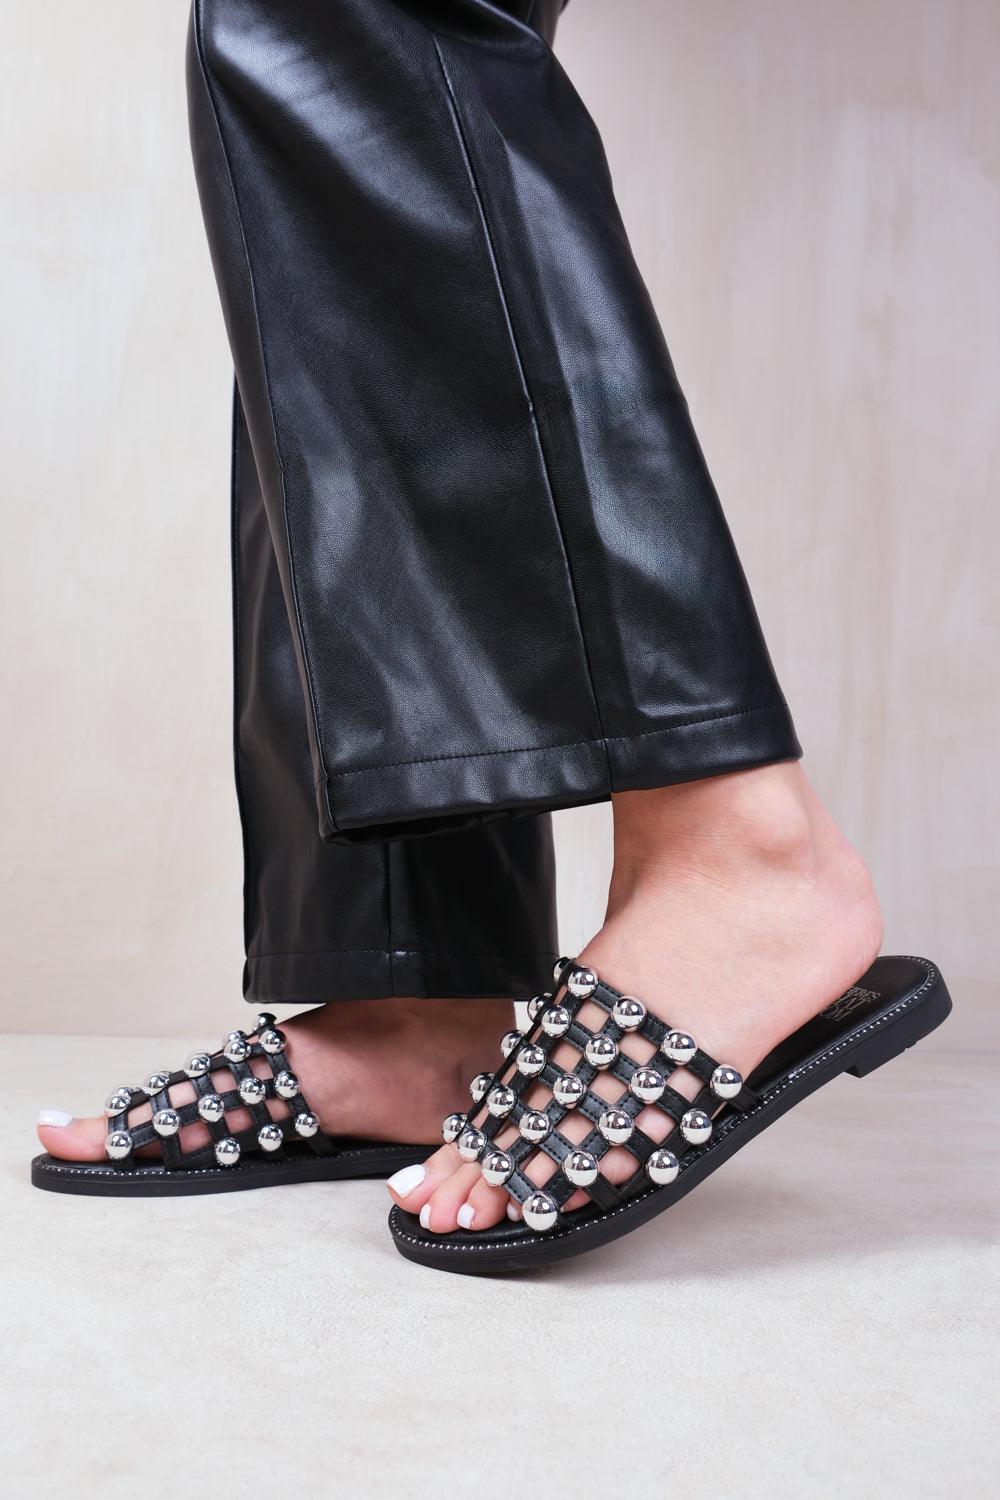 KELLY STUDDED SLIDER WITH CAGED STUDDED DETAILING IN BLACK FAUX LEATHER